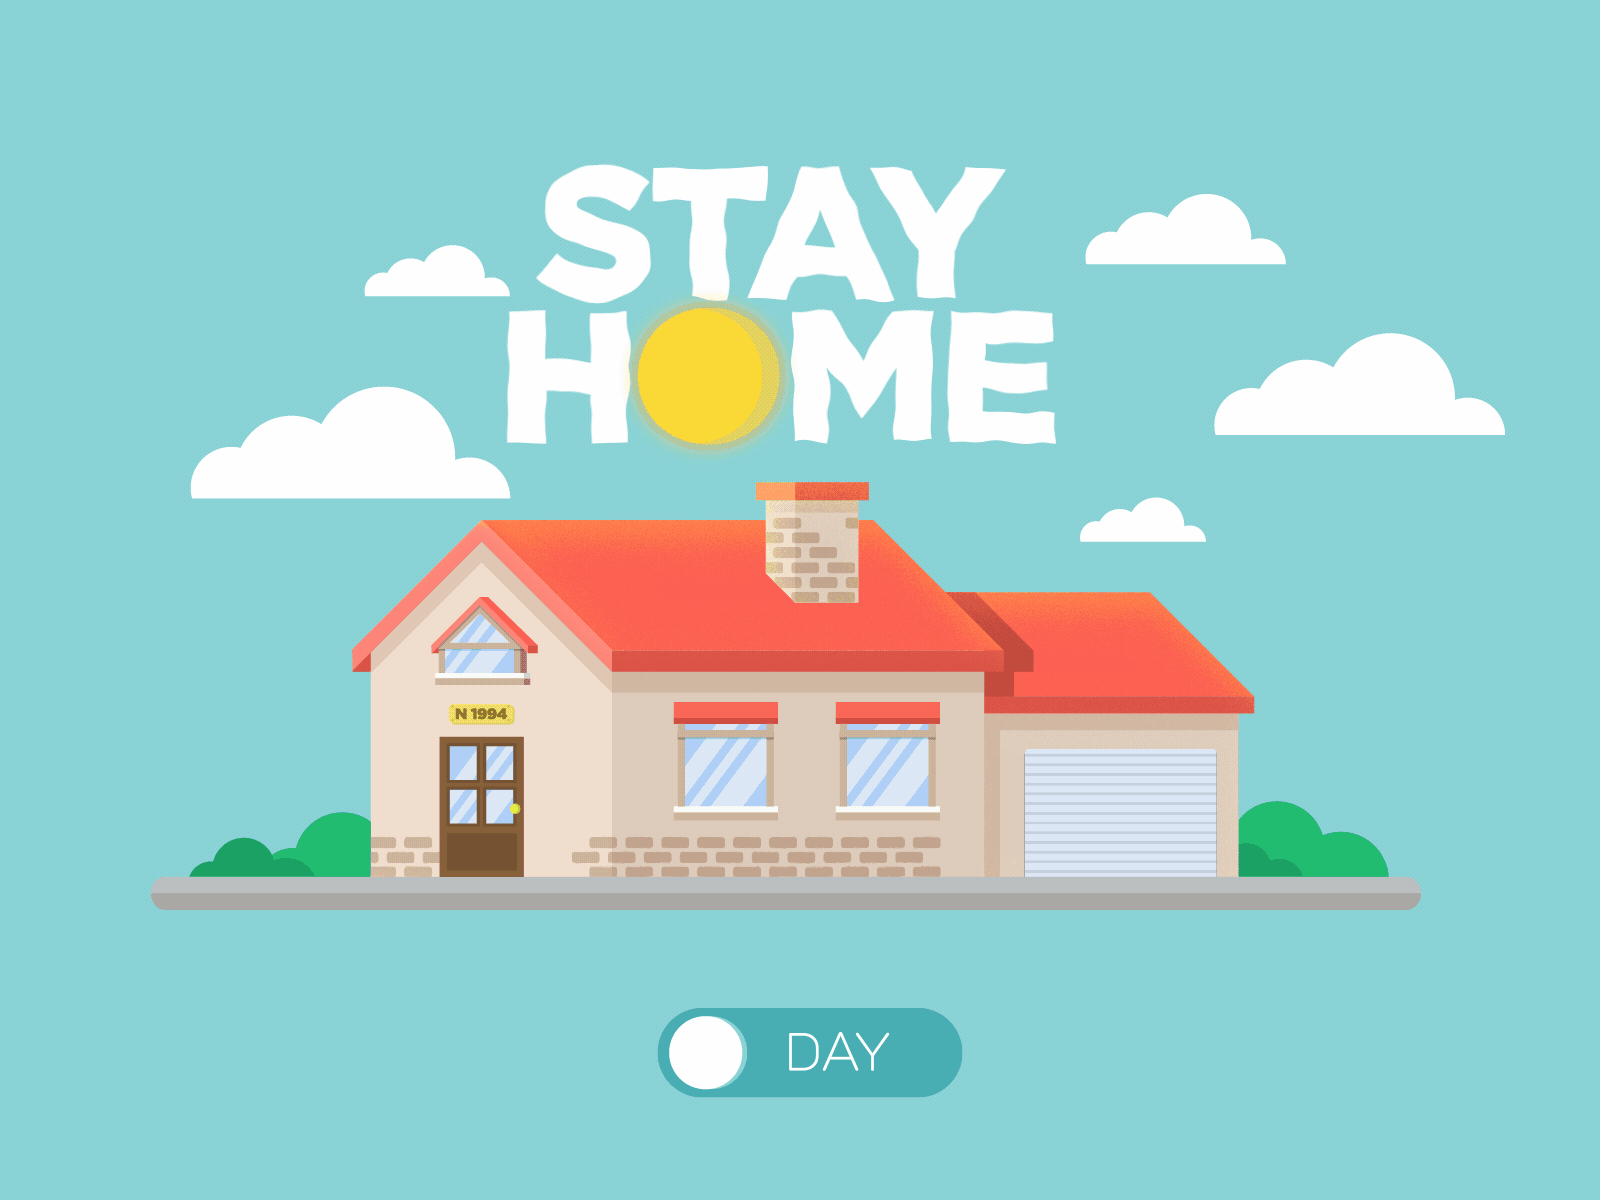 Stay Home 01